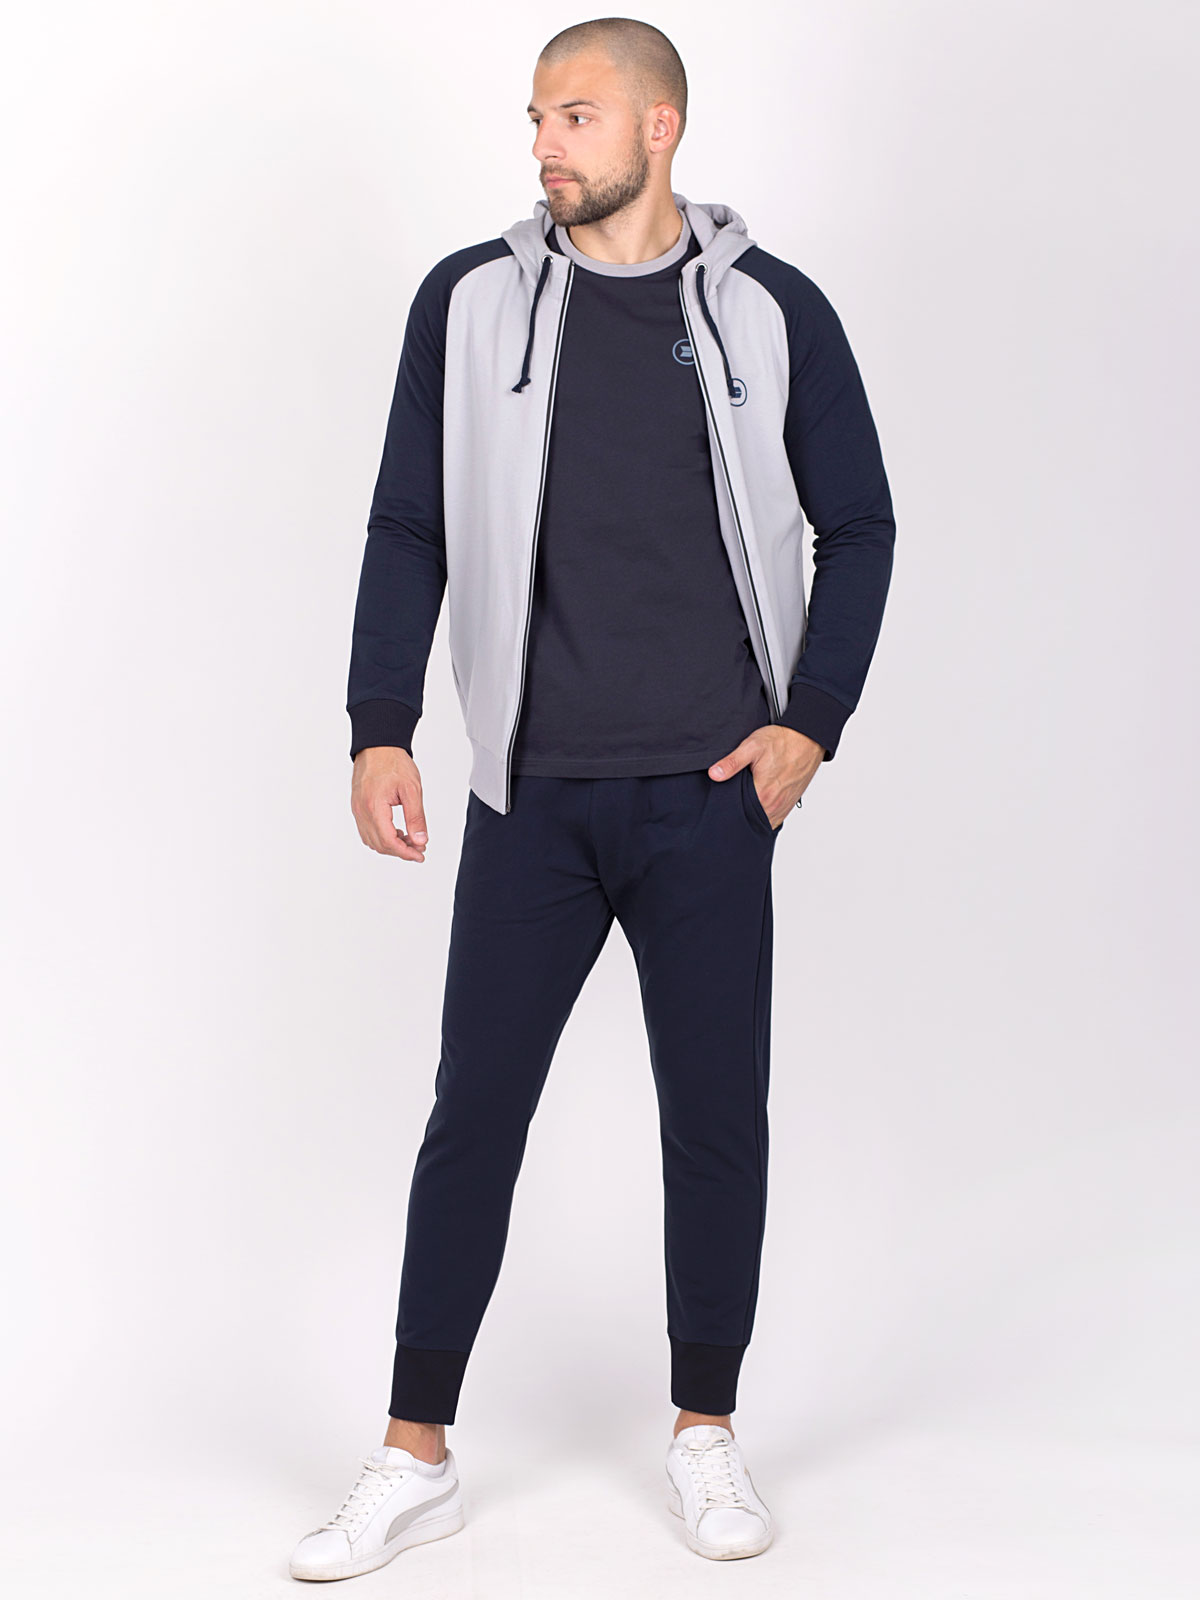 Sports set in gray and dark blue - 69004 € 61.30 img2